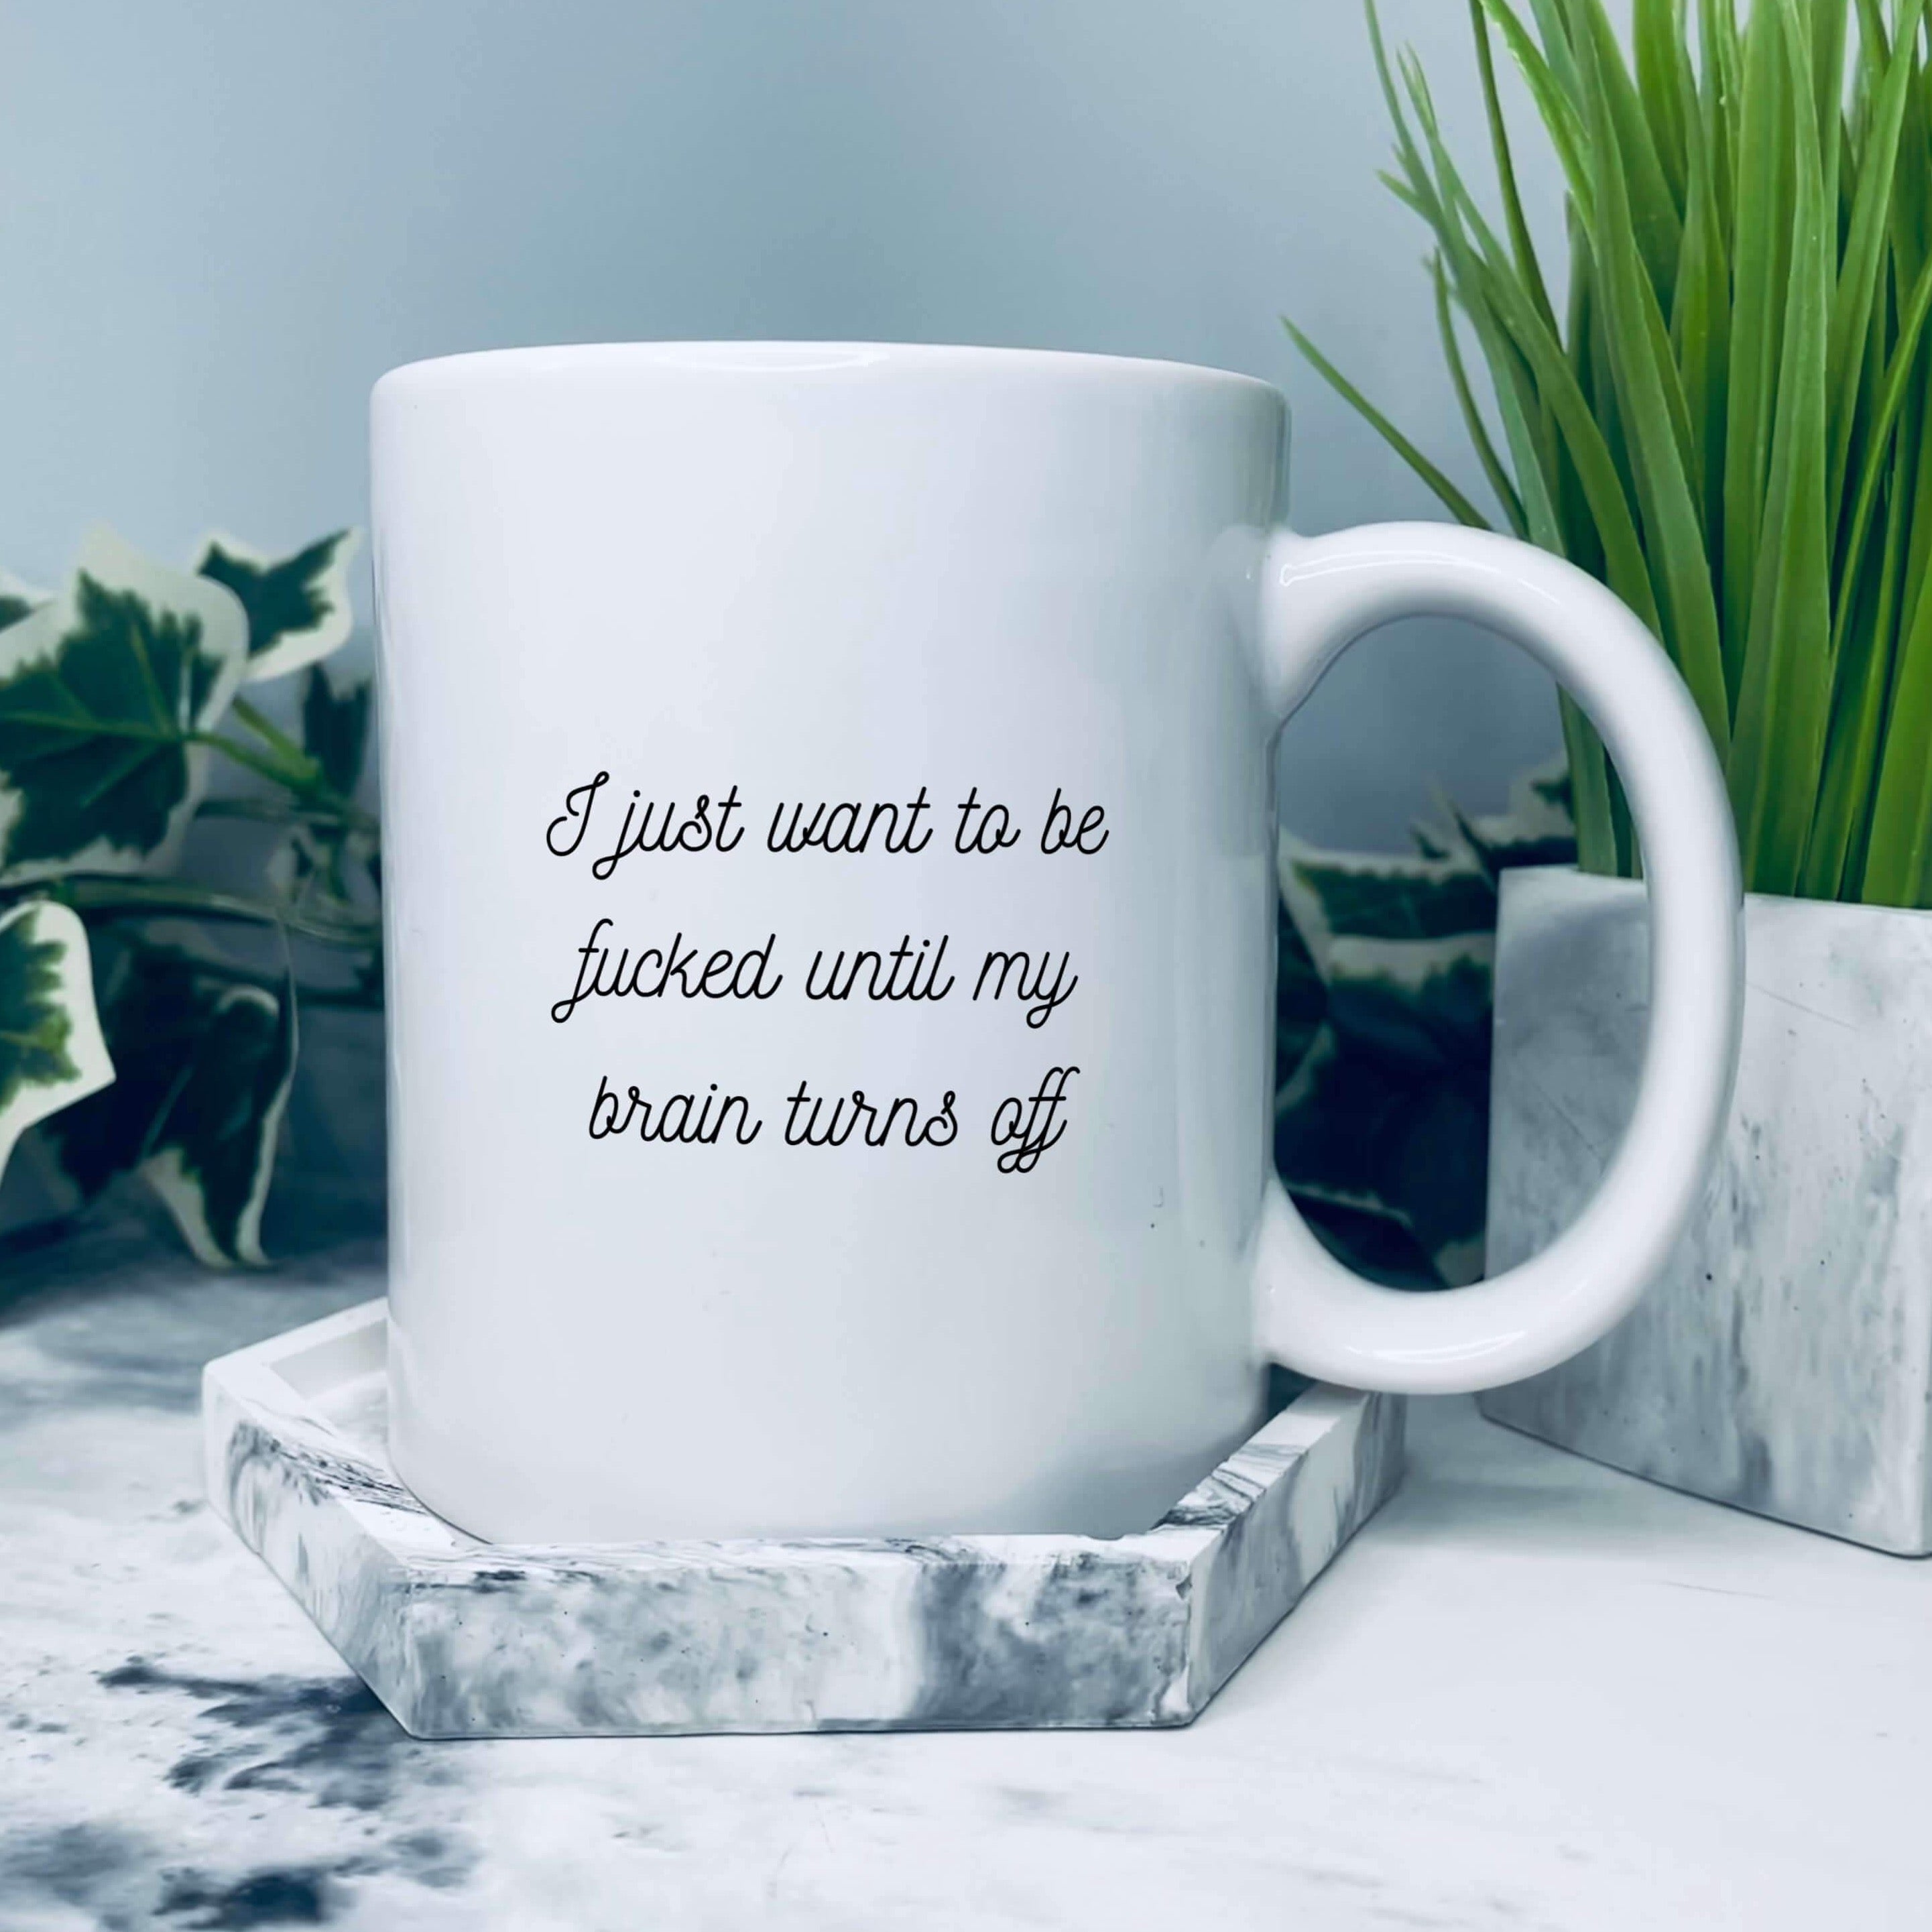 Mug that says: I just want to be fucked until my brain turns off